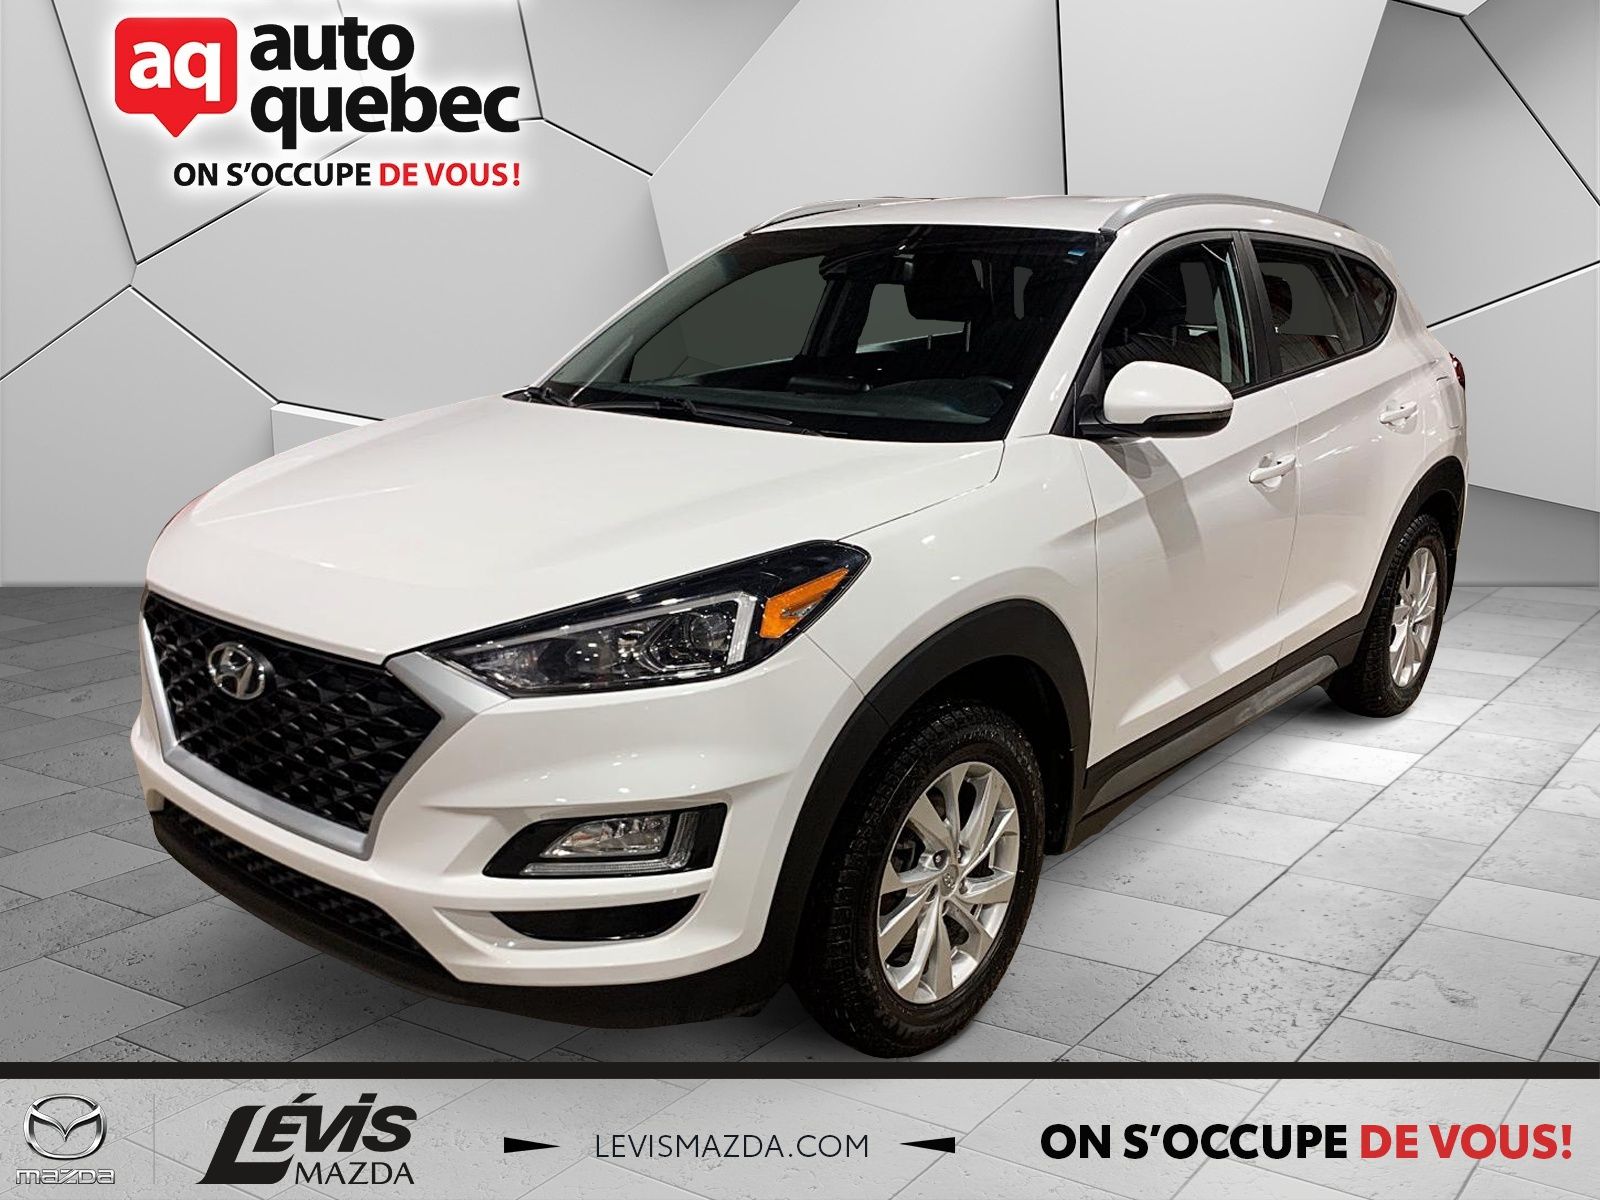 Levis Mazda | Pre-owned 2019 Hyundai Tucson Preferred AWD | 32882 KM  SEULEMENT for Sale